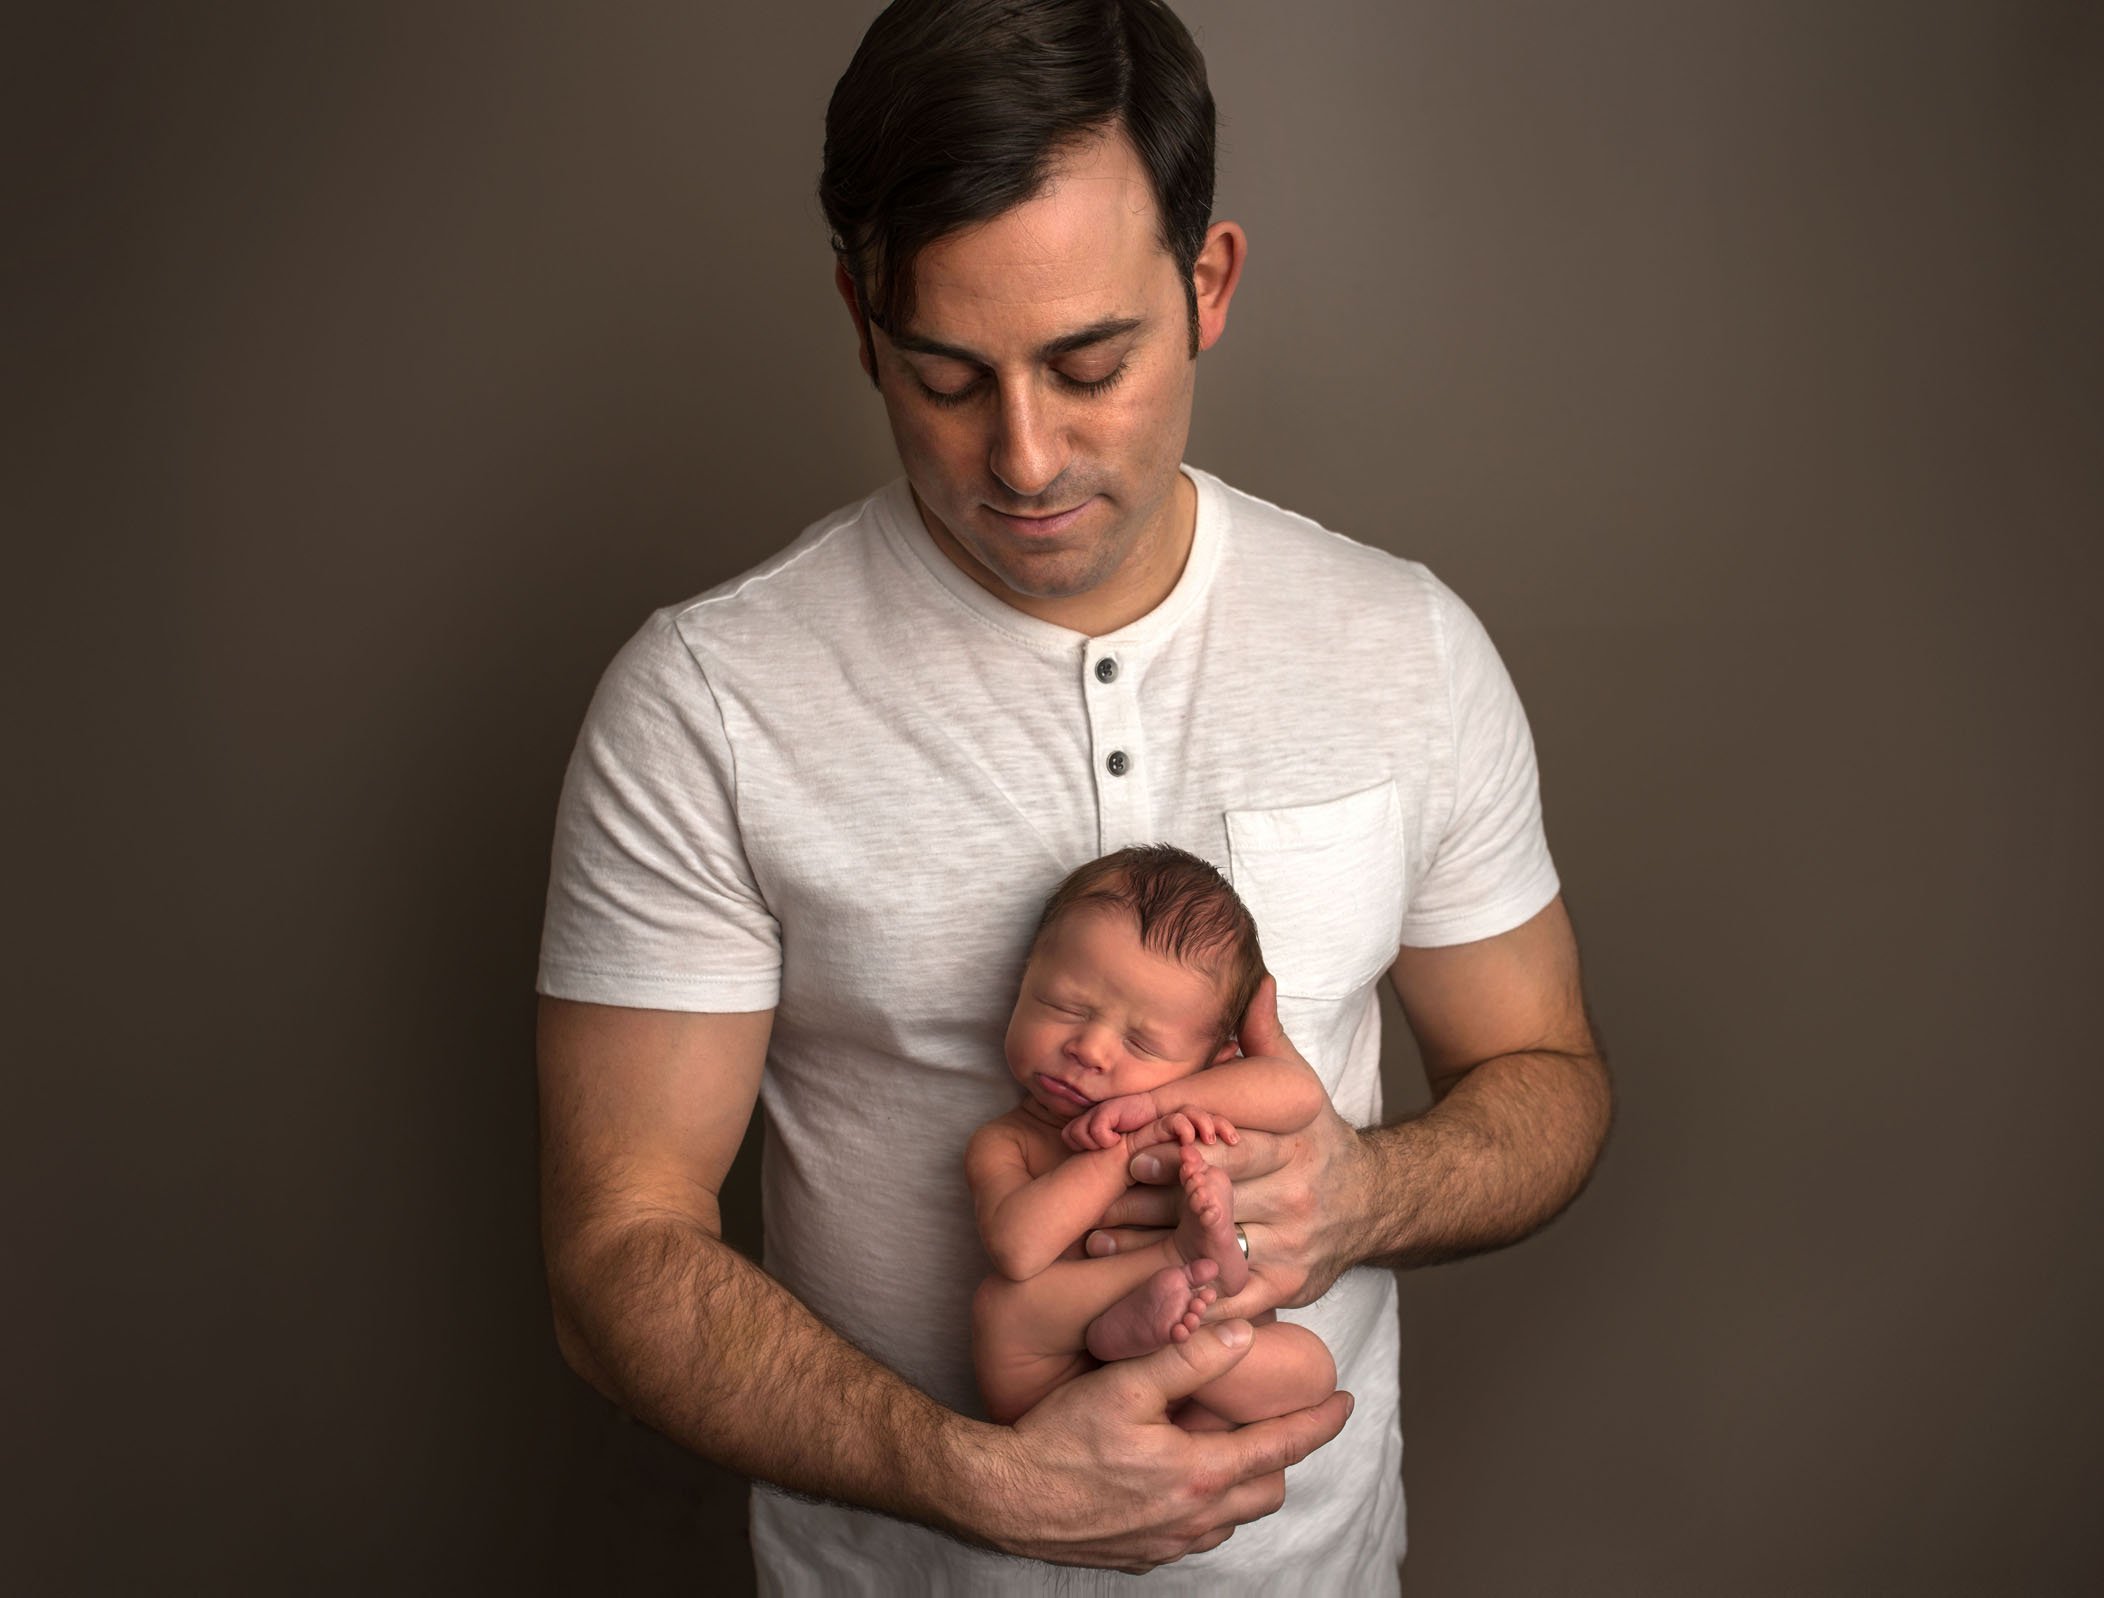 newborn held against dad's chest facing outward all curled up One Big Happy Photo